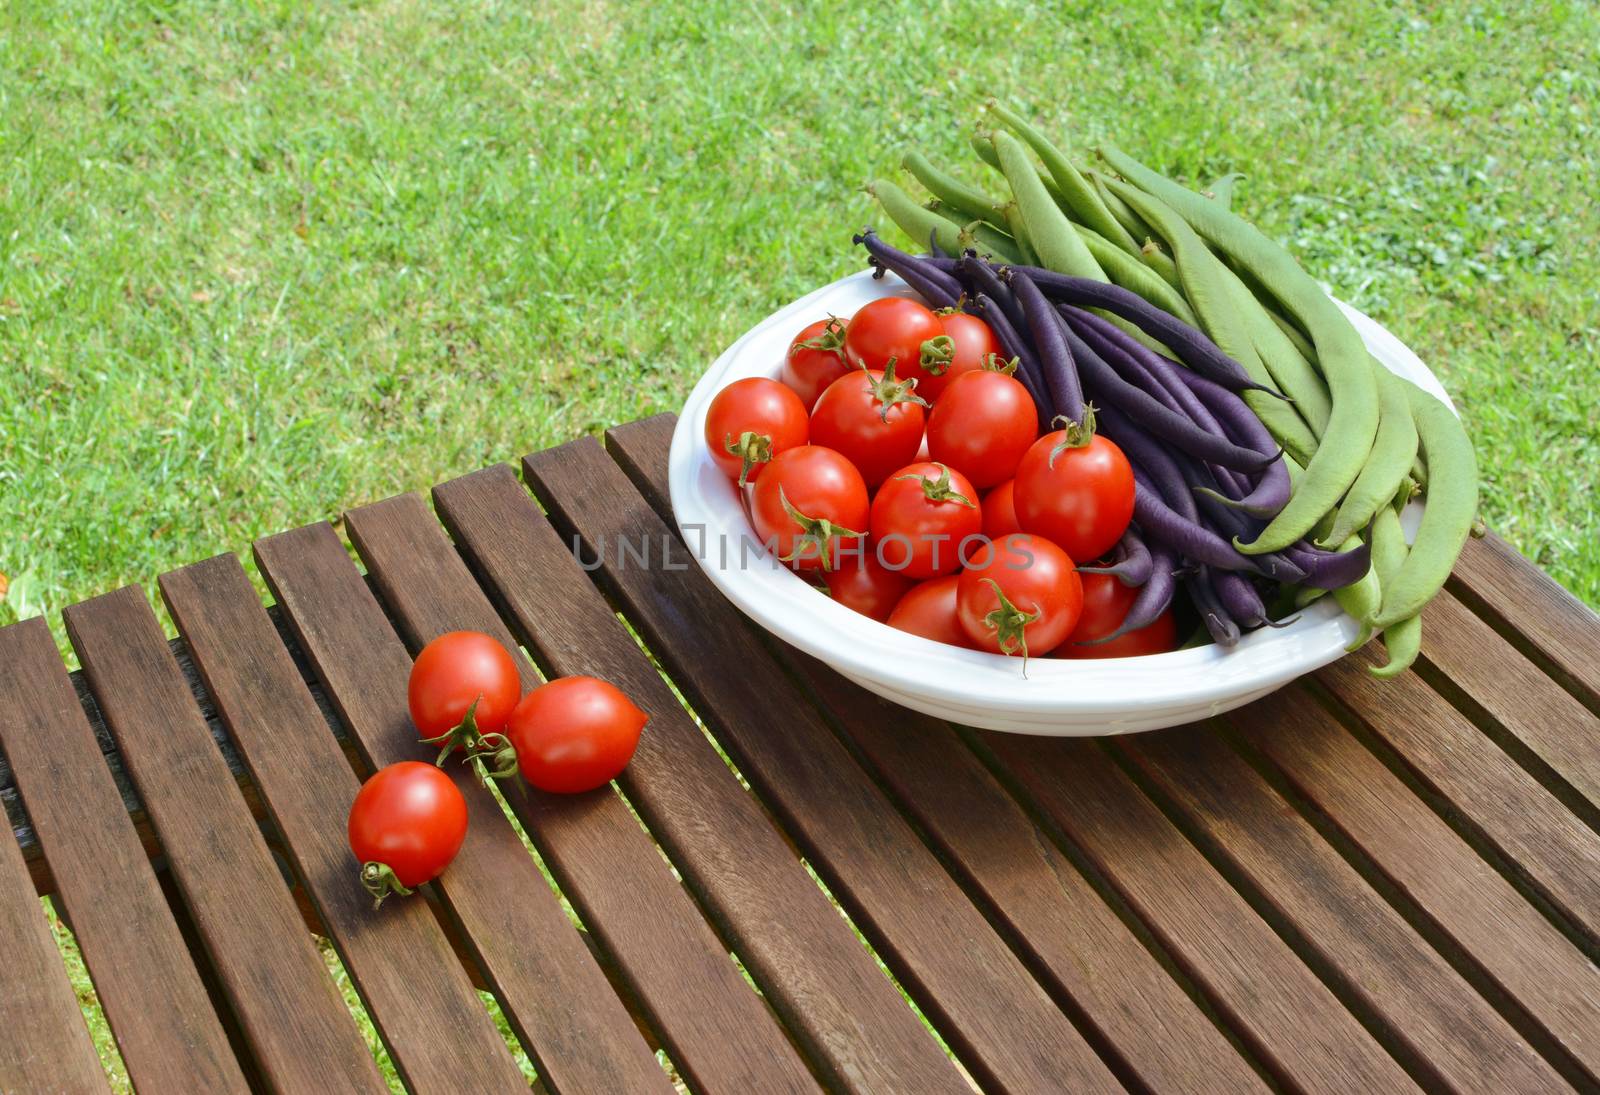 Red tomatoes with green and purple beans in a dish, some cherry tomatoes spilled on a wooden picnic table 